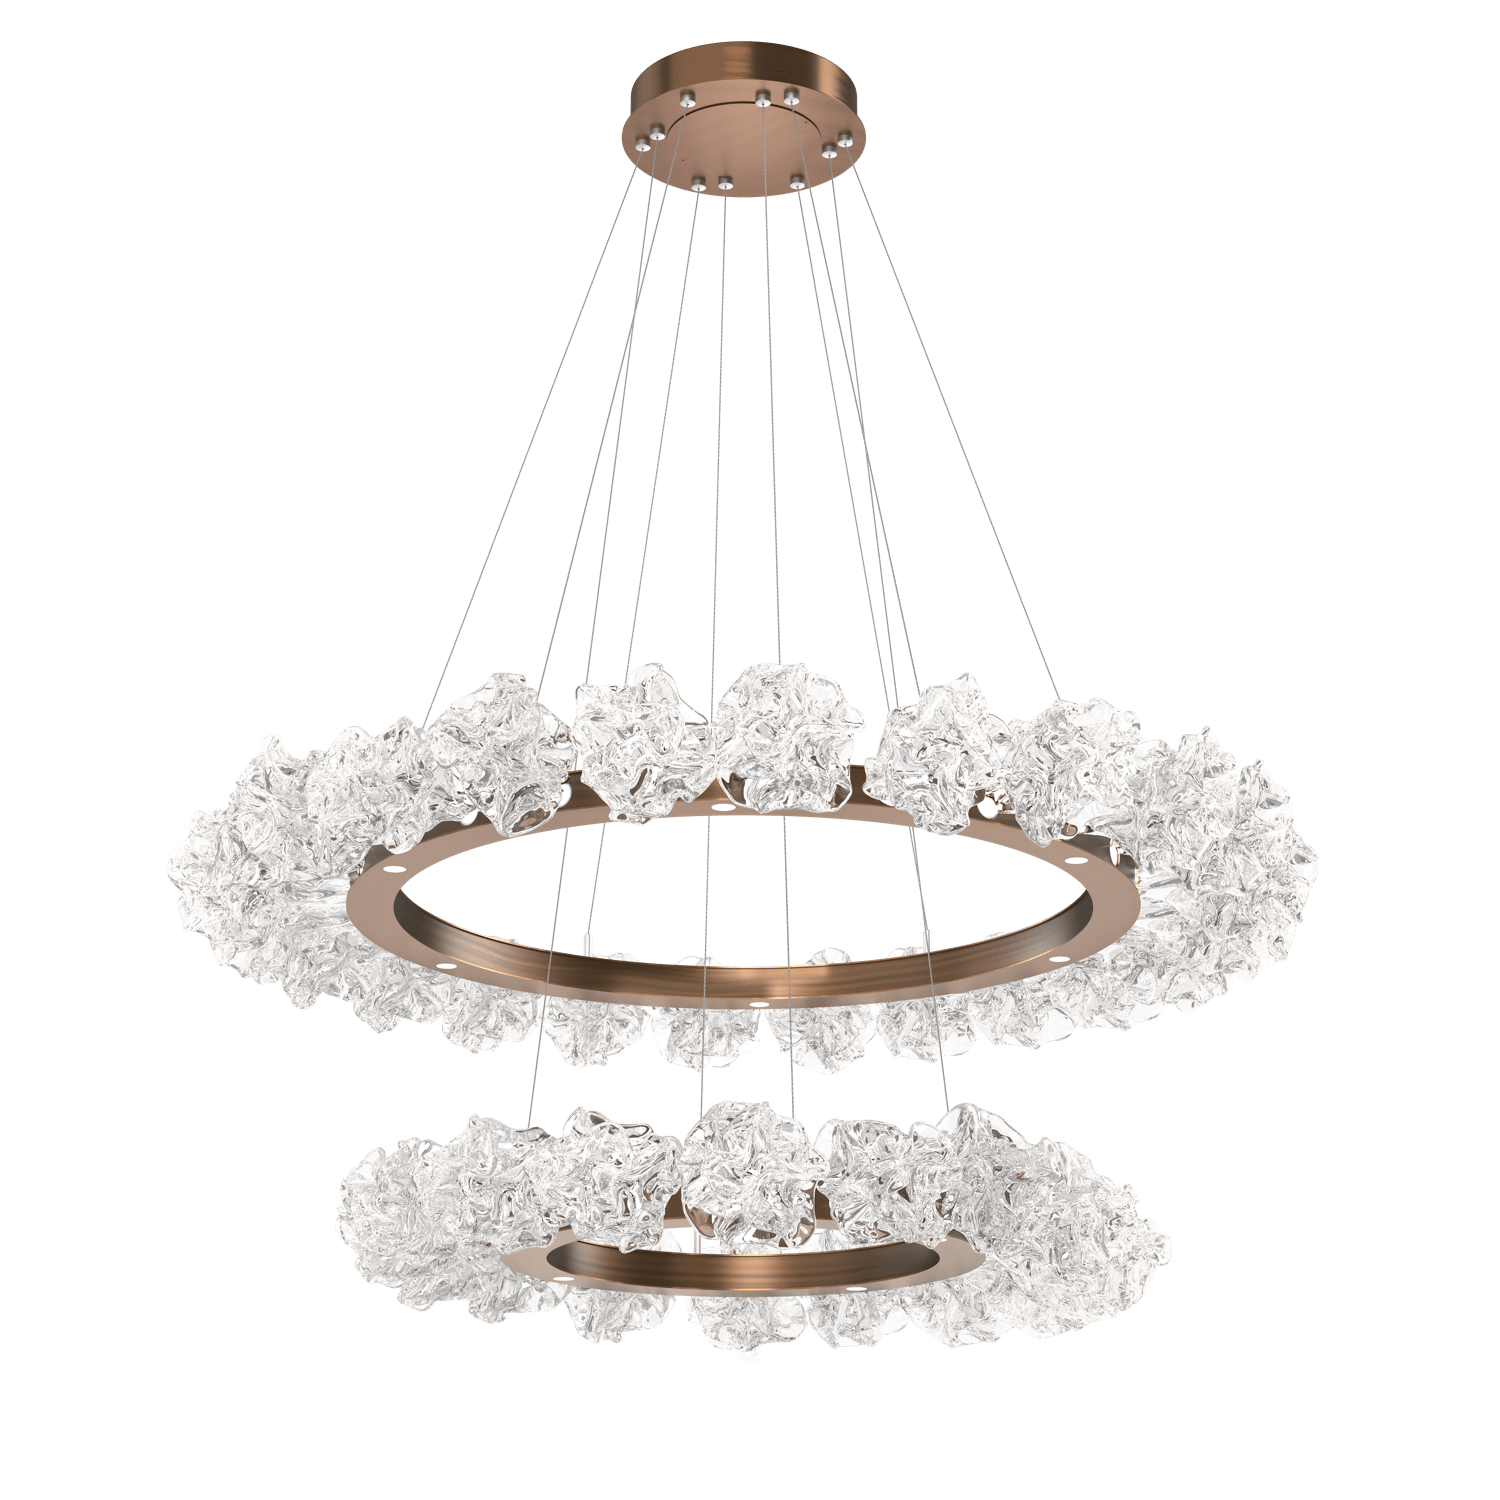 CHB0059-2B-RB-Hammerton-Studio-Blossom-50-inch-two-tier-radial-ring-chandelier-with-oil-rubbed-bronze-finish-and-clear-handblown-crystal-glass-shades-and-LED-lamping